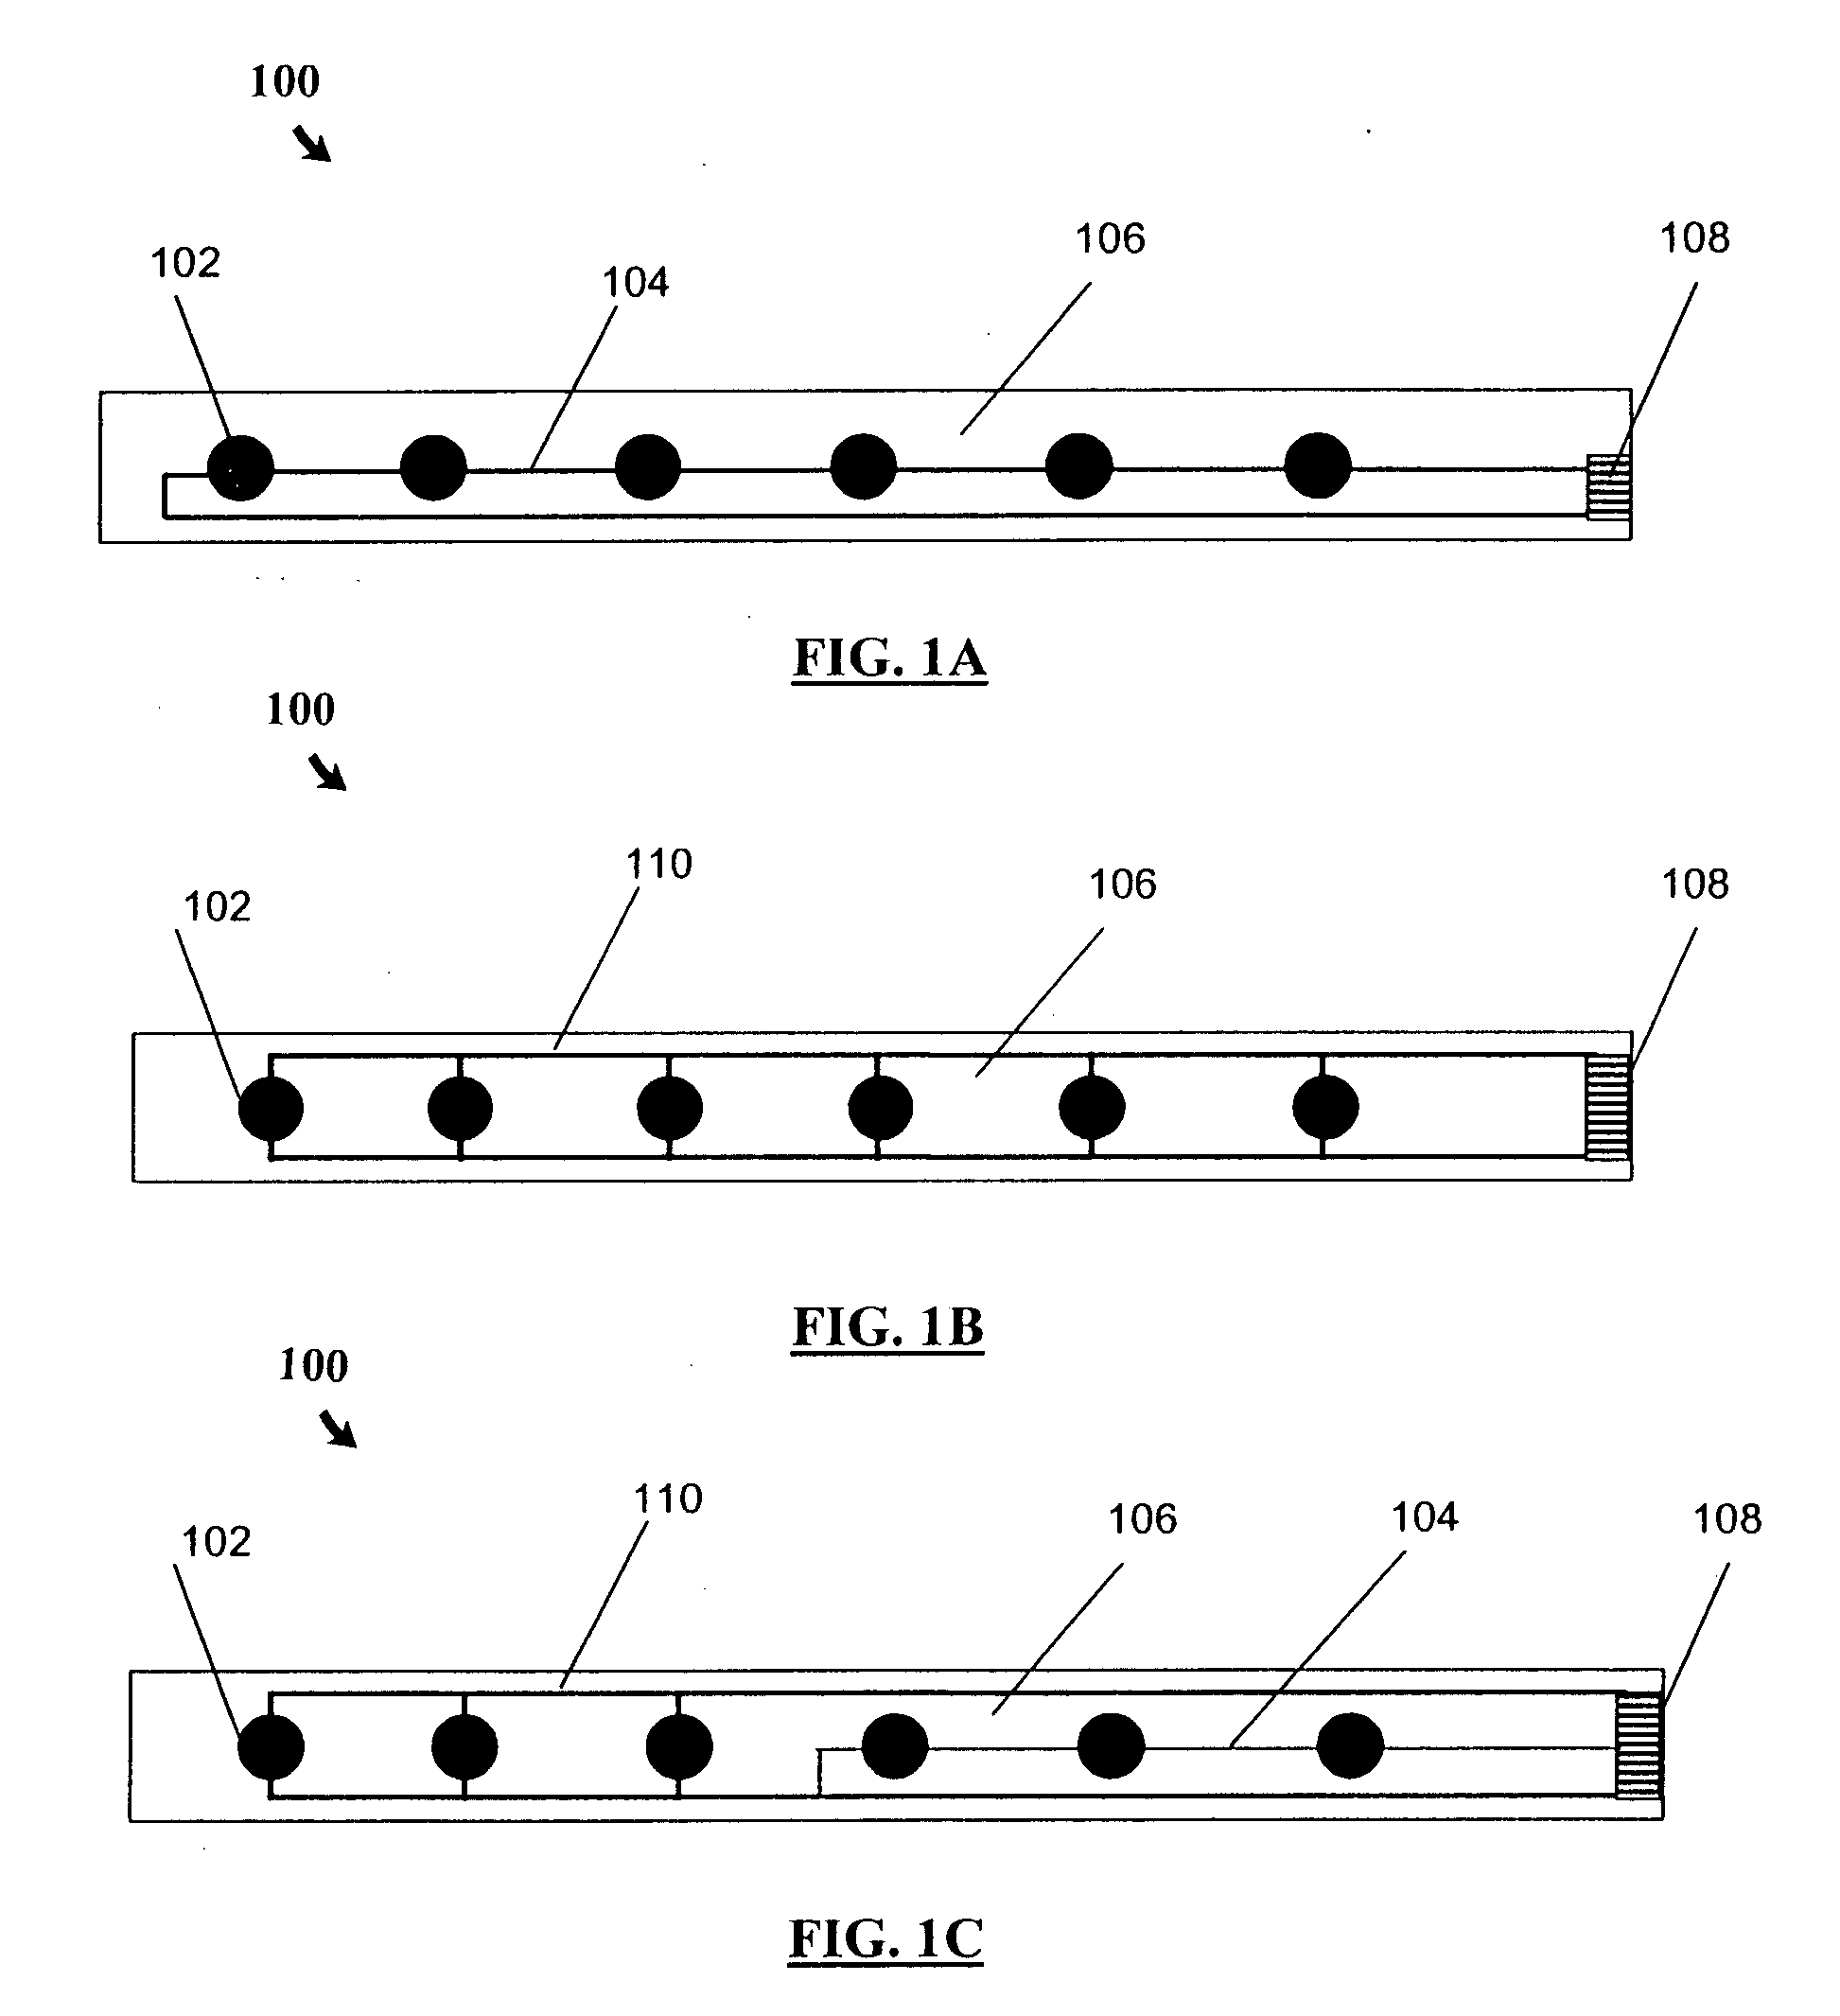 Single-wire sensor/actuator network for structural health monitoring